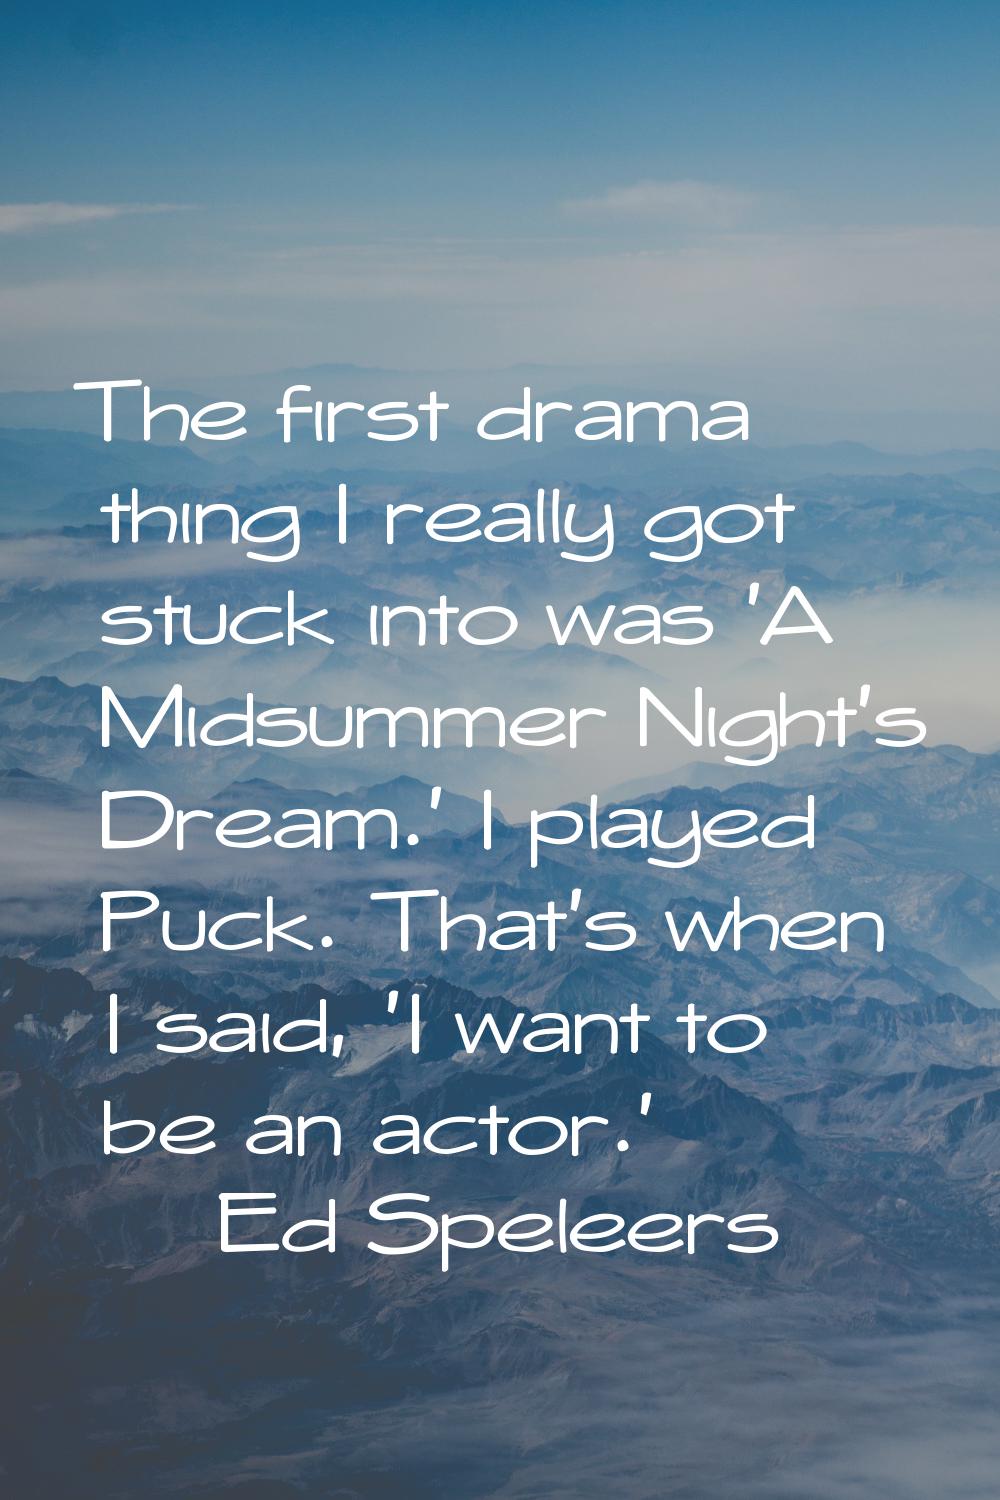 The first drama thing I really got stuck into was 'A Midsummer Night's Dream.' I played Puck. That'